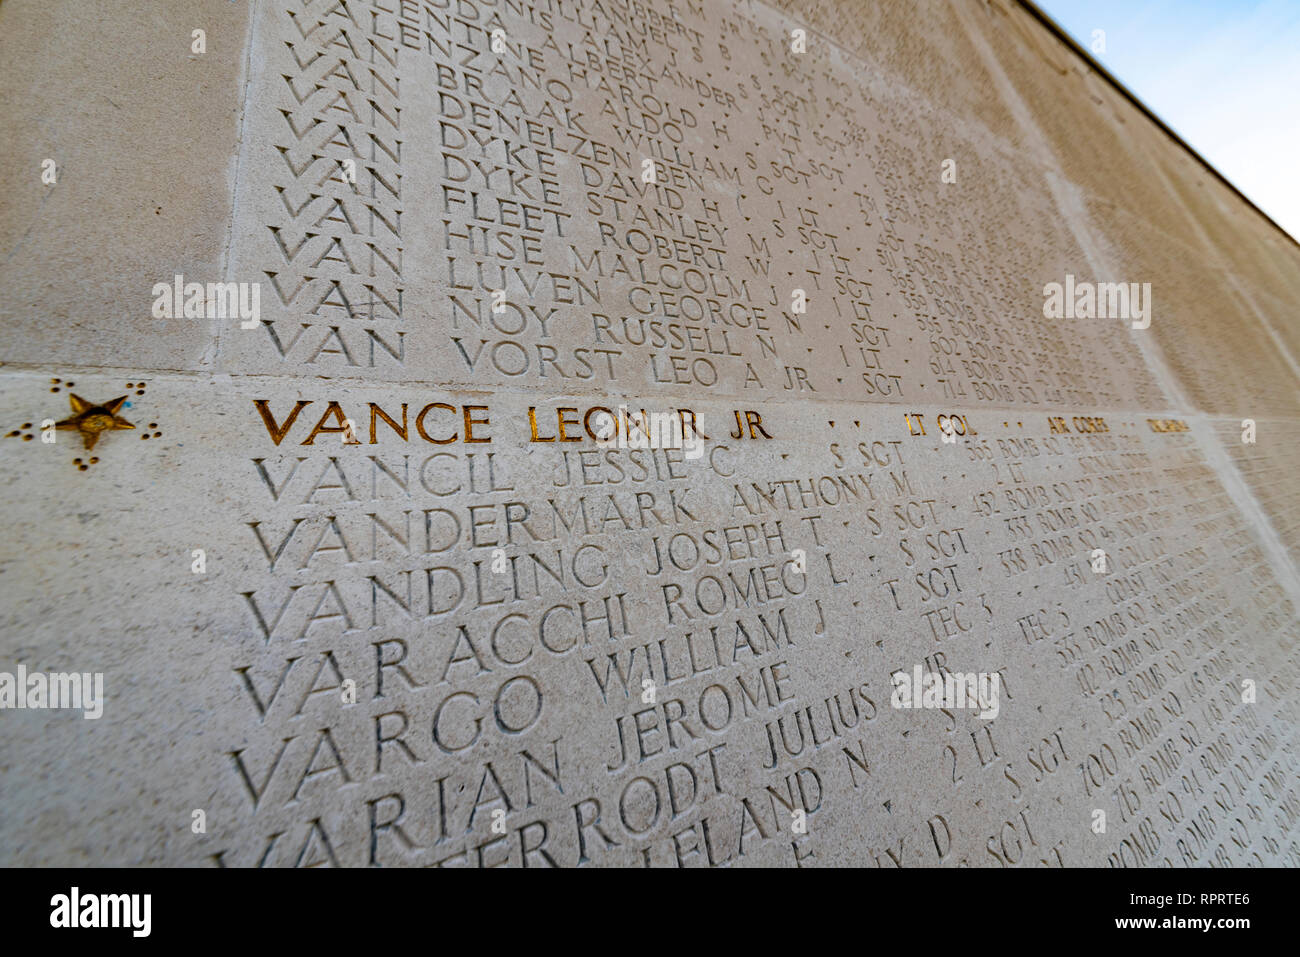 Wall of the Missing. Cambridge American Cemetery near Madingley, Cambridgeshire, UK. Thousands of US servicemen missing in action. Leon Vance Stock Photo